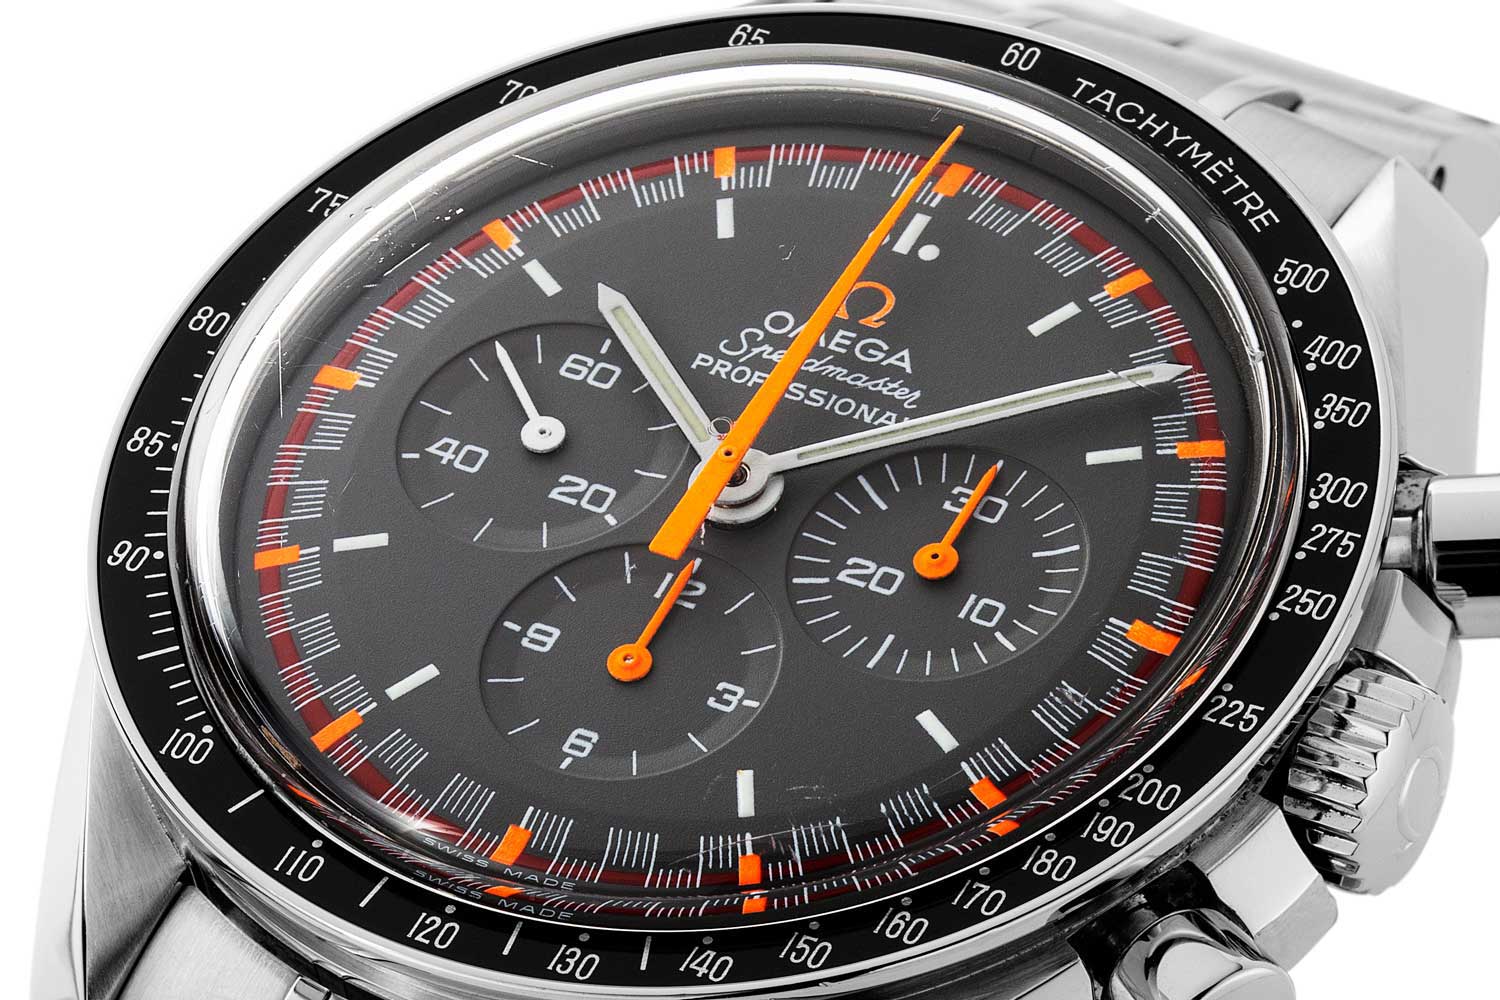 The Grey Racing was also the inspiration for the highly-coveted Omega Speedmaster Japan Racing, a limited edition of 2,004 watches with a Grey Racing Dial. Seen here is the Limited-Edition Japan Racing Dial Reference 3570.40.00 (©Revolution)